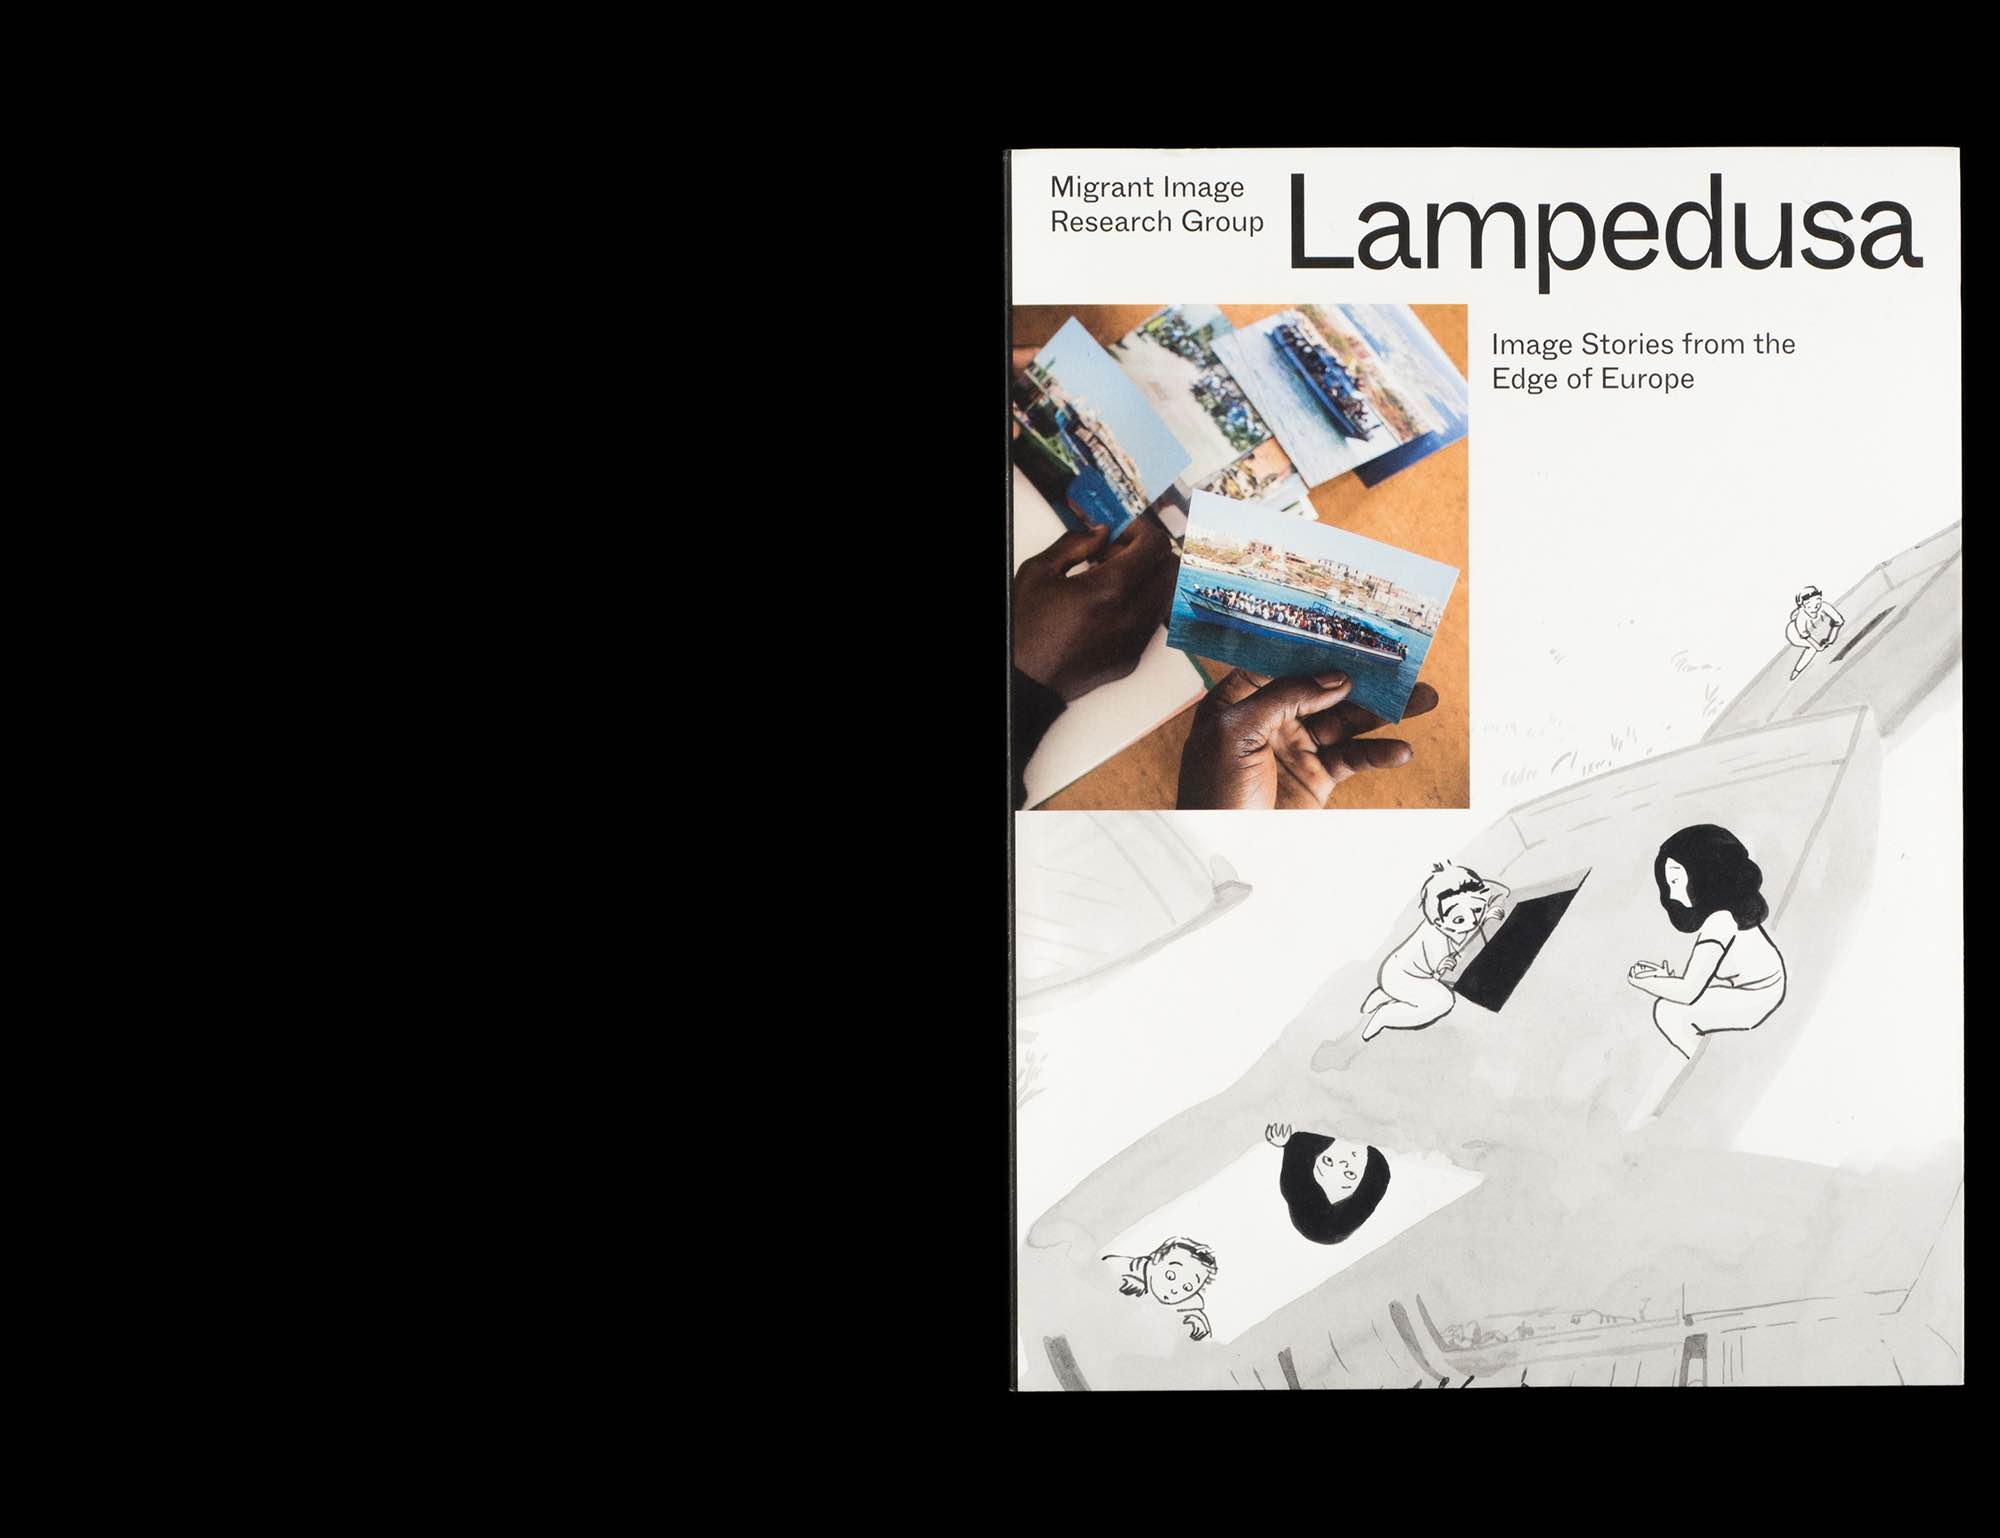 Lampedusa â€“ Image Stories from the Edge of Europe Armin Linke Design for migration